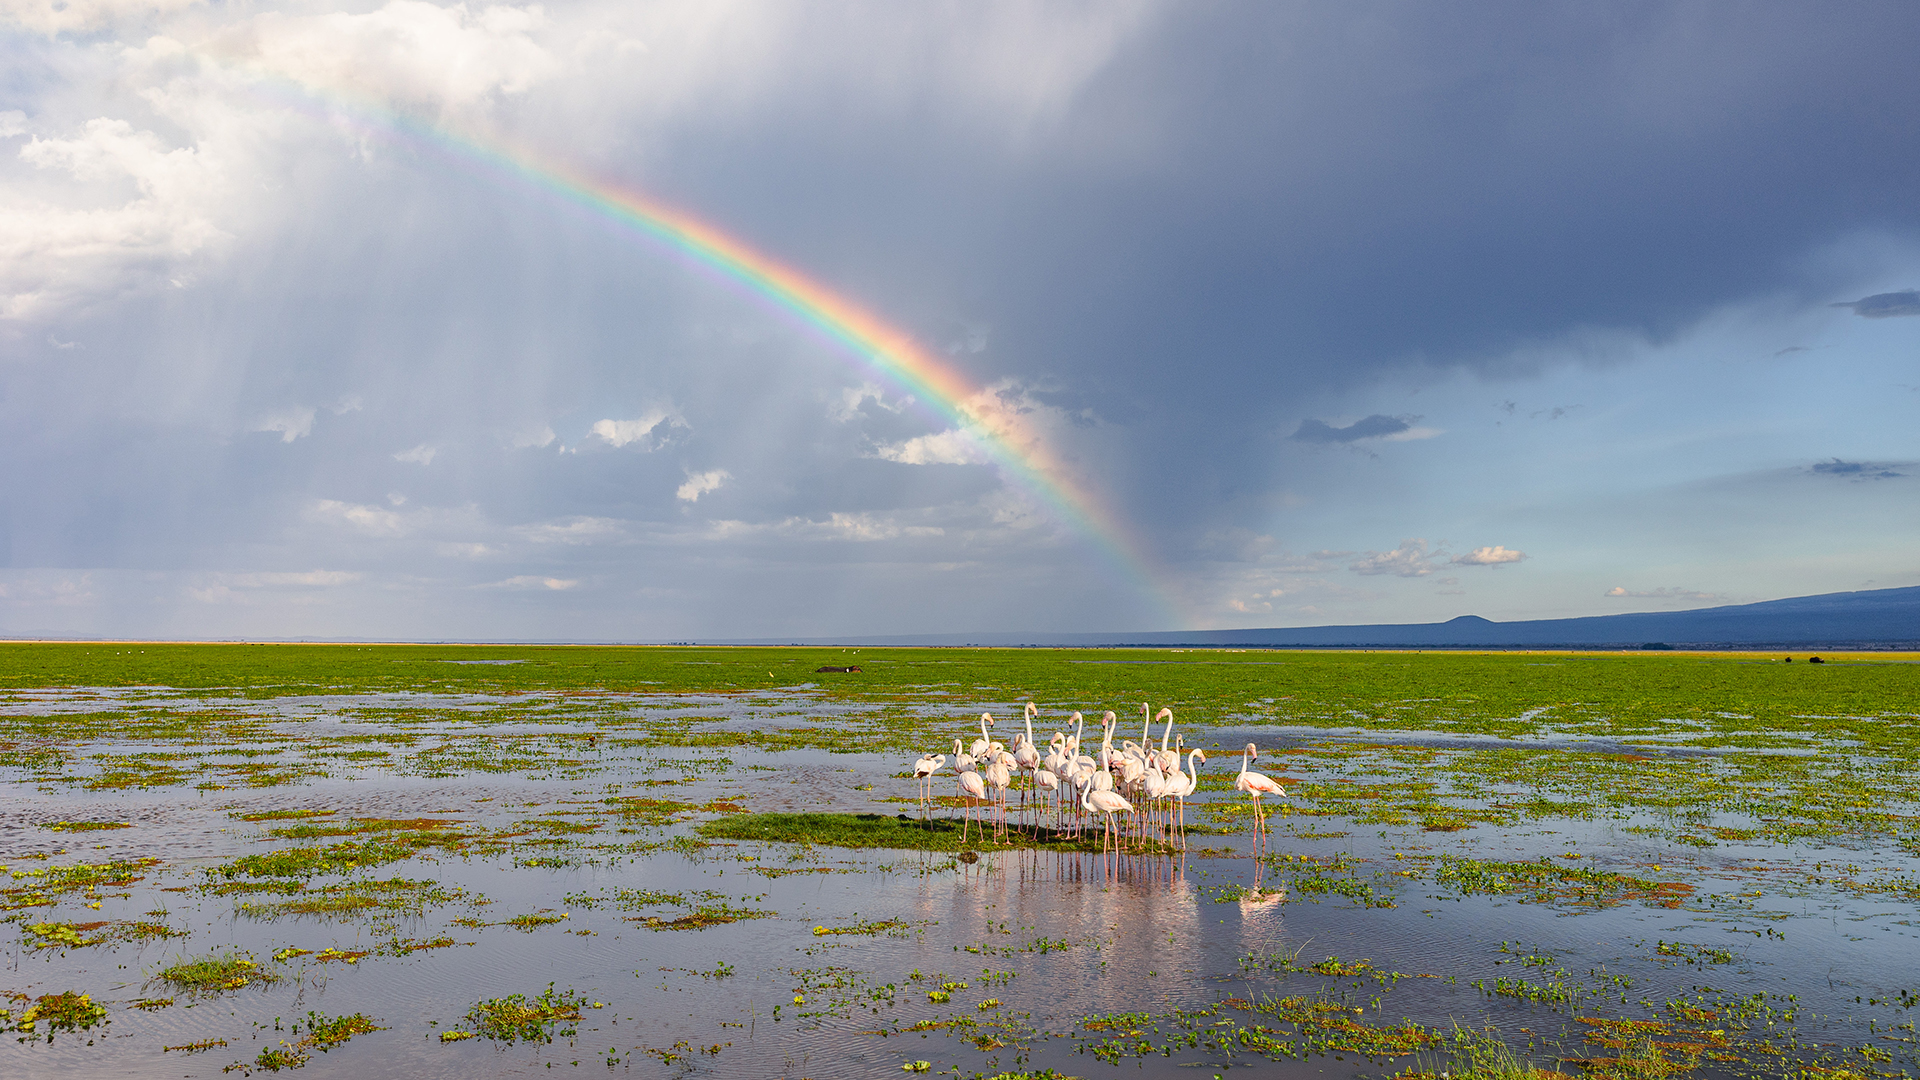 Landscape image of Amboseli, Kenya, with a group of flamingos wading in water and a rainbow in a cloudy sky